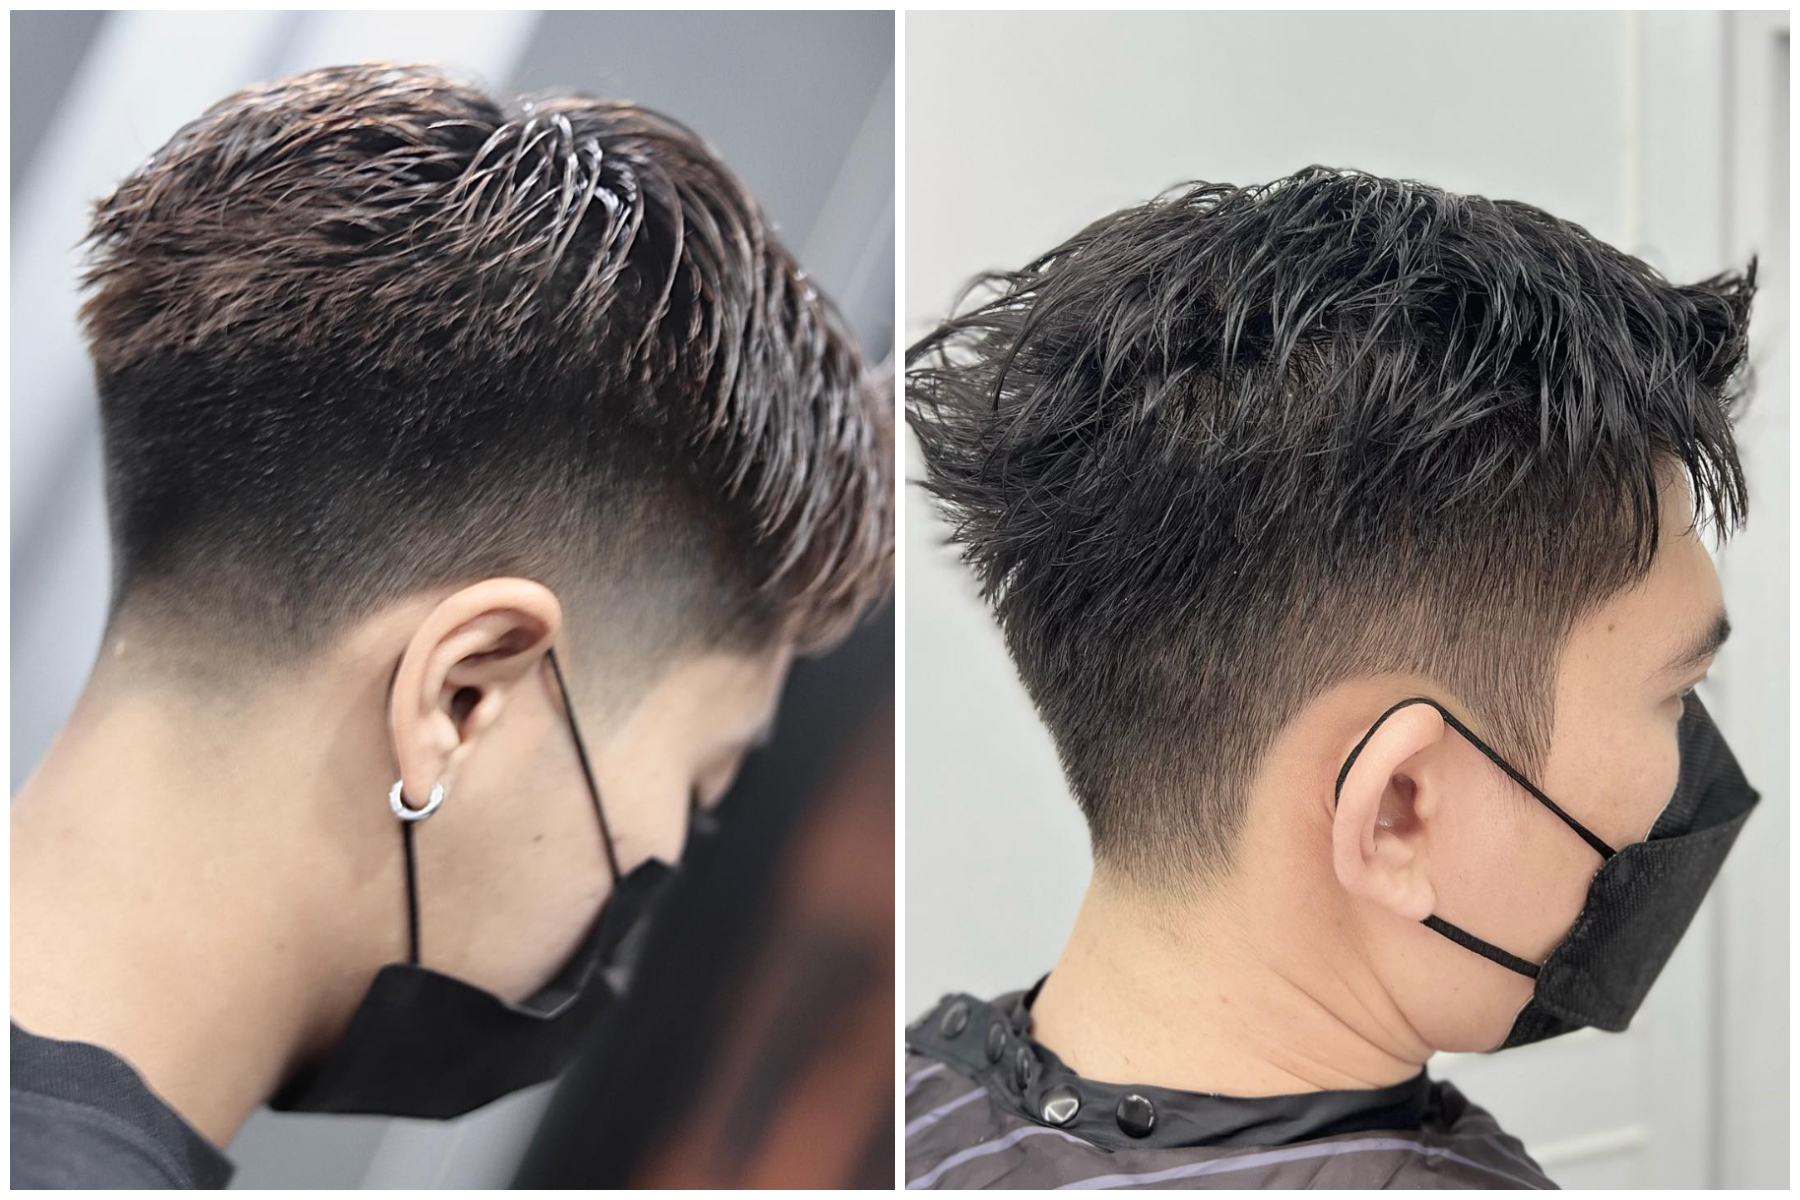 Greazy Munkey's - 💡 Two Block Haircut - A two block haircut showcases the  trimmed or shaved back and sides of the head while leaving the top long and  styled as desired.